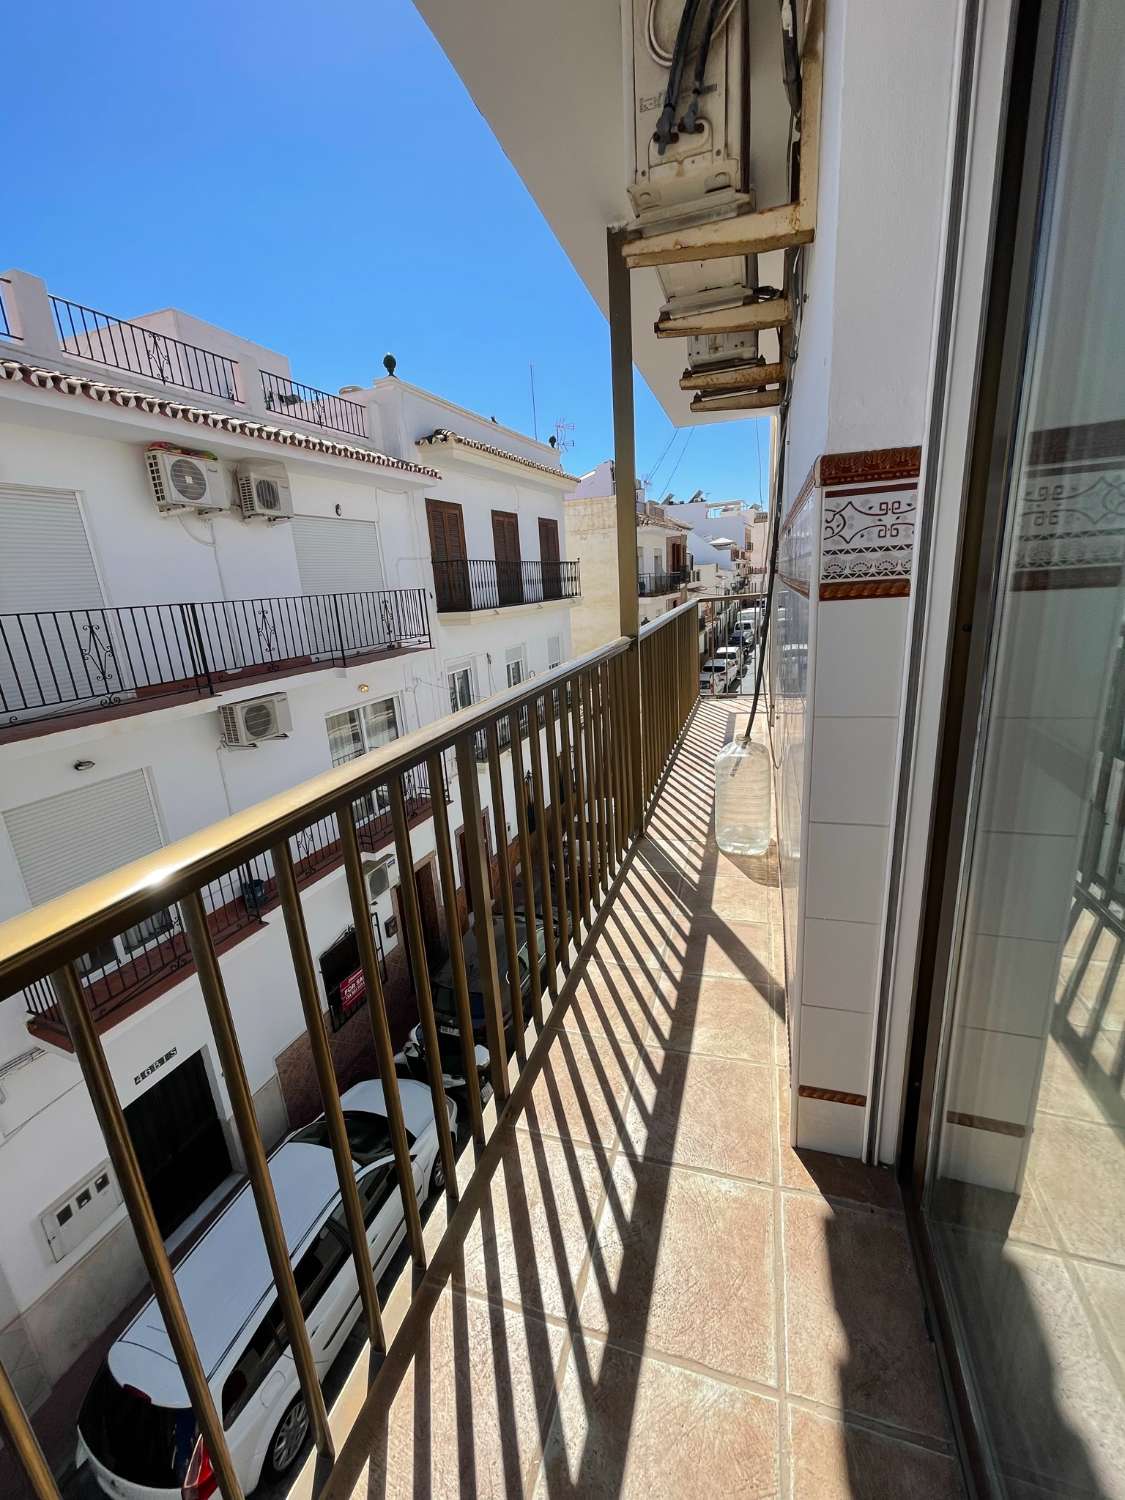 Apartment with private terrace and 4 bedrooms in the center of Nerja